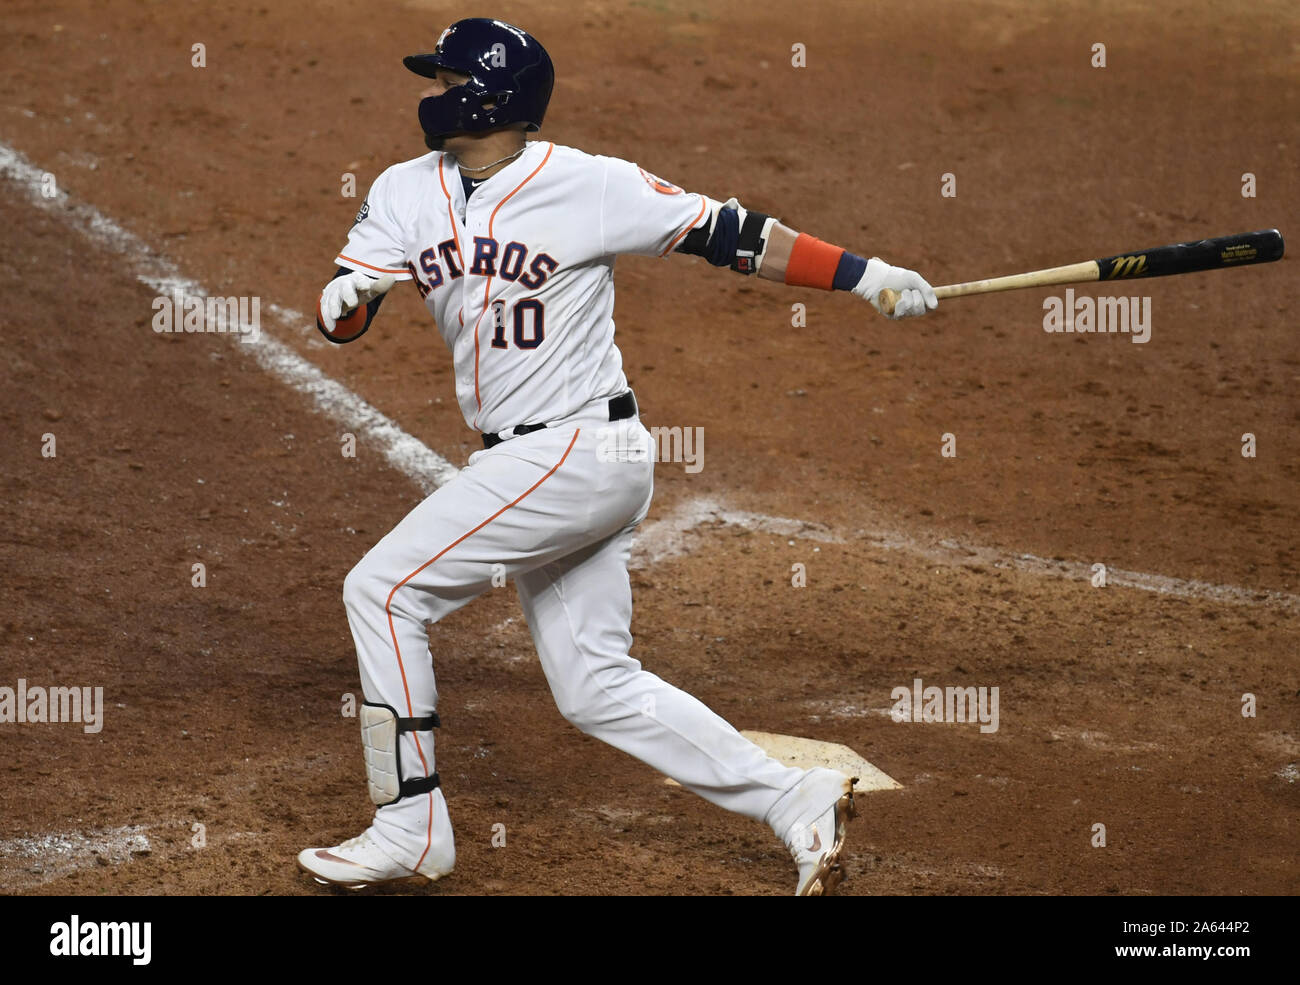 Houston, United States. 23rd Oct, 2019. Houston Astros Yuli Gurriel hits a double against the Washington Nationals in the sixth inning of Game 2 of the World Series at Minute Maid Park in Houston, Texas on Wednesday, October 23, 2019. The Nationals lead the best-of-seven series 1-0. Photo by Trask Smith/UPI Credit: UPI/Alamy Live News Stock Photo